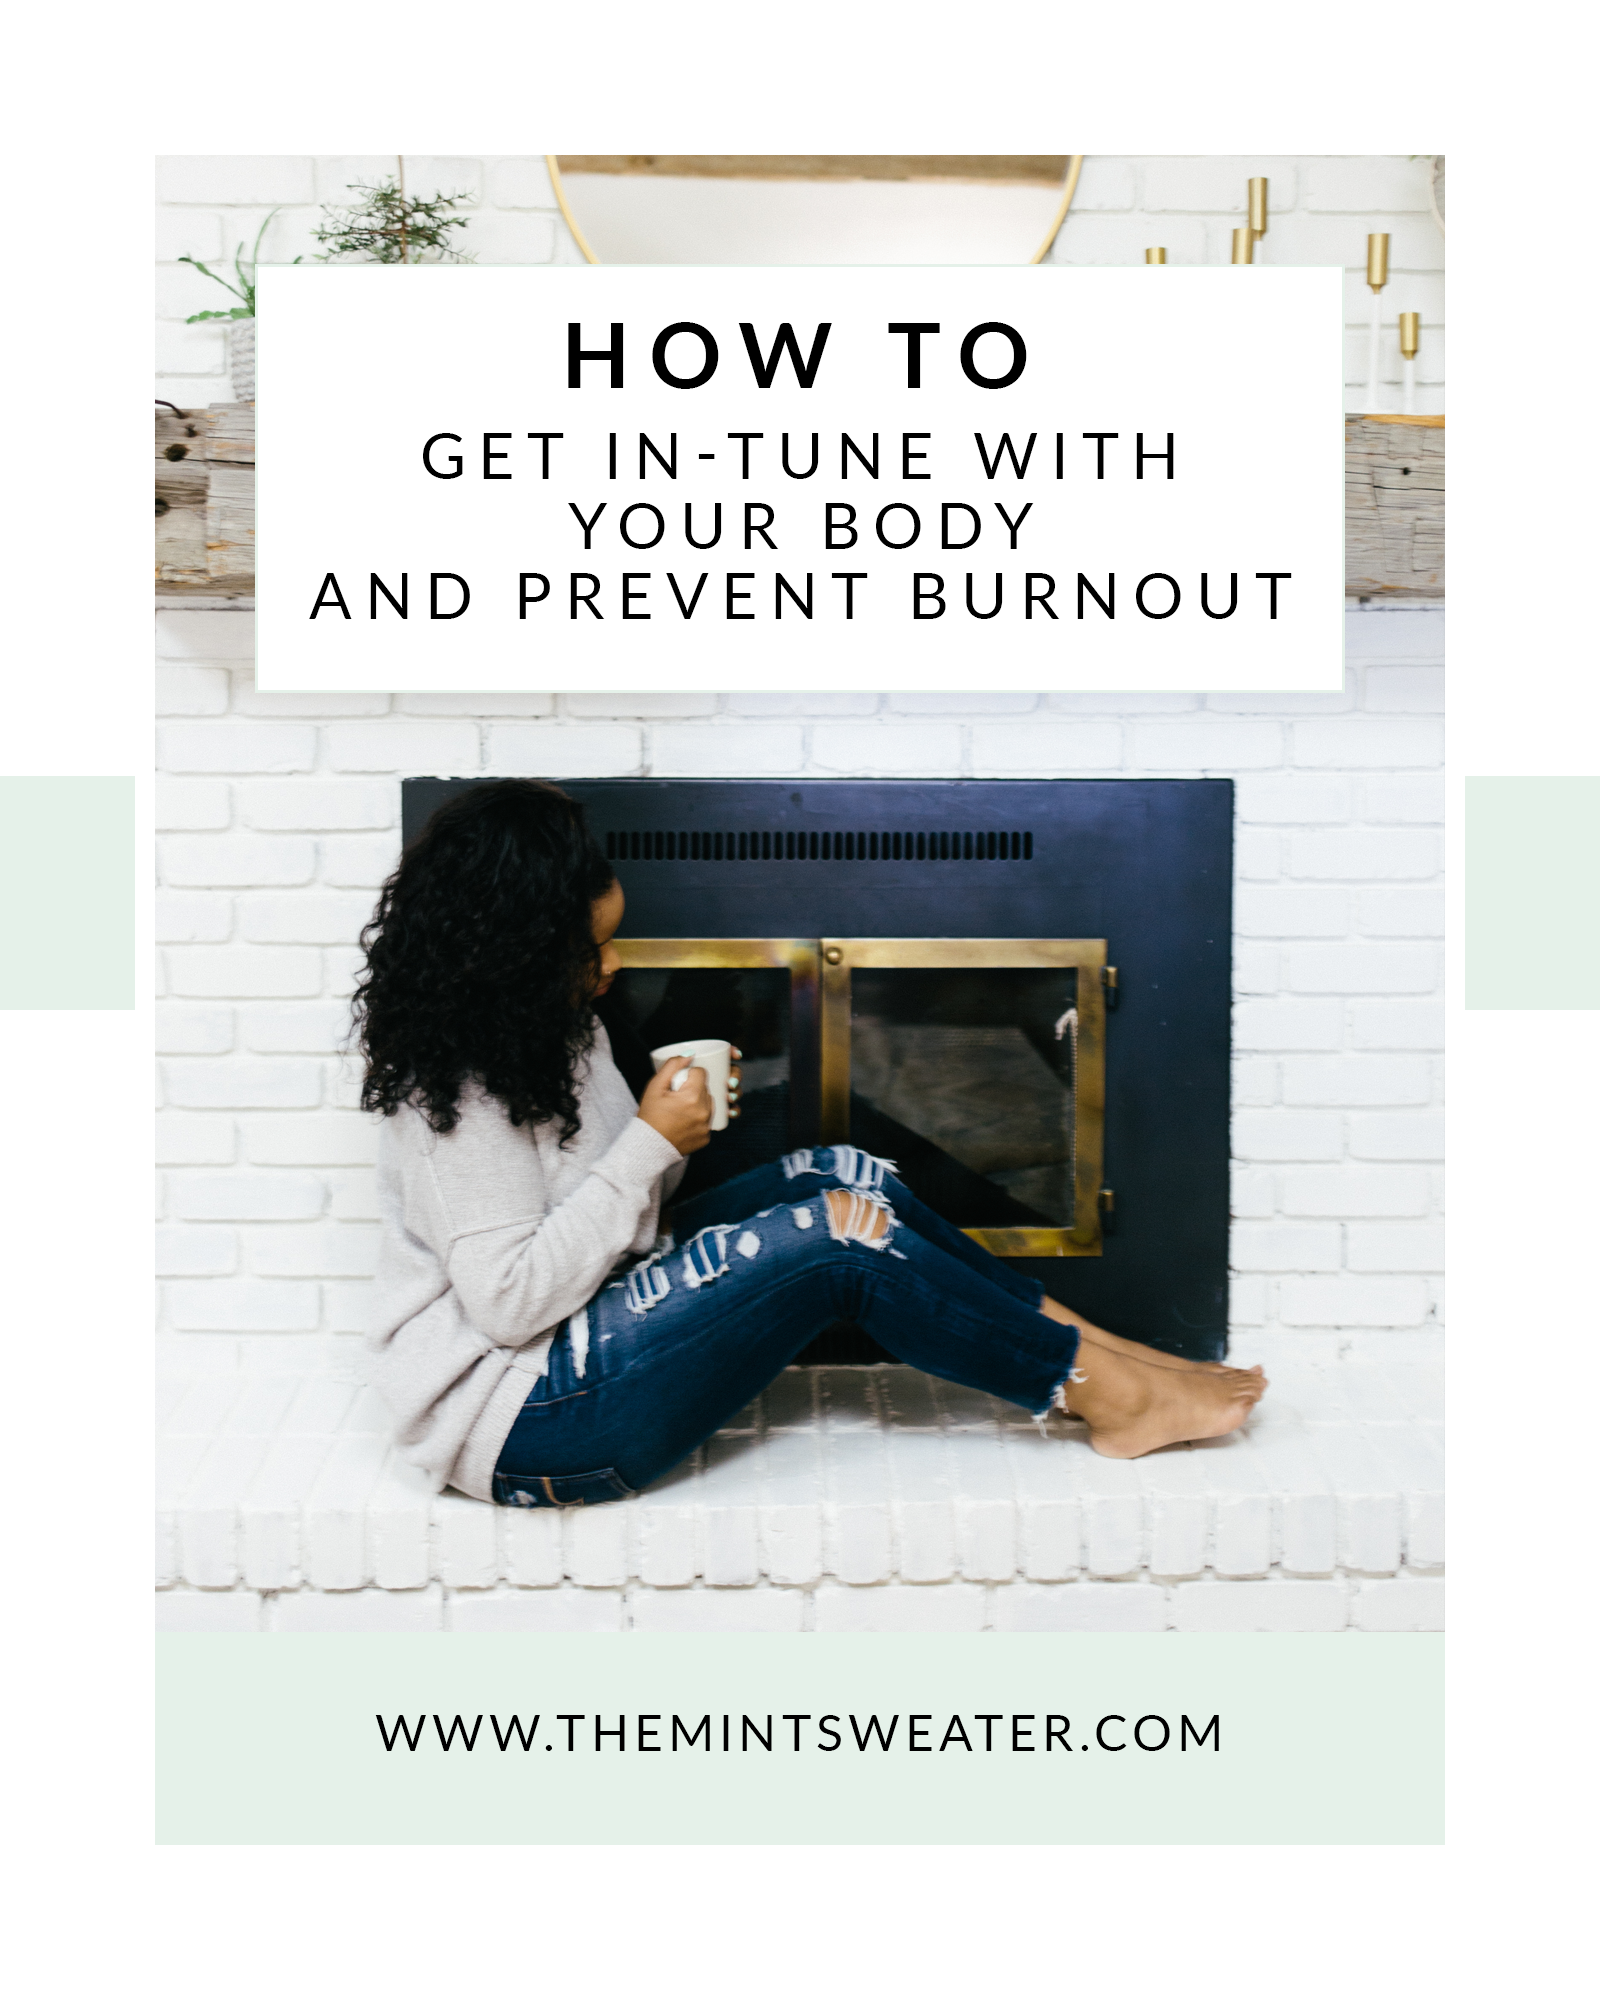 In-tune with your body-tune-body-prevent-burnout-manage stress-overwhelm-self care-self love